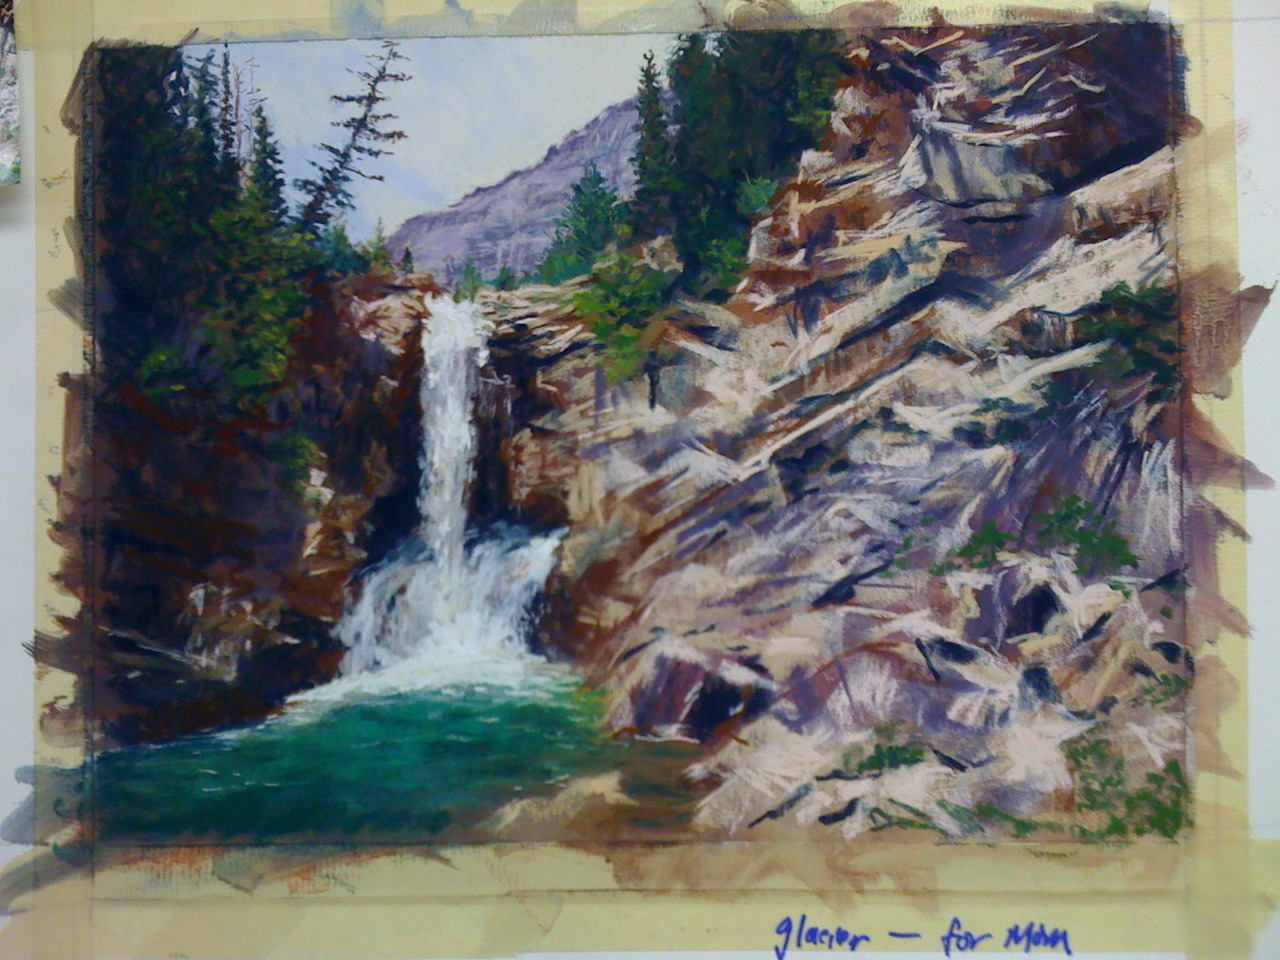 i did this in soft pastels. from my own photograph of a waterfall in Glacier National Park. http://cookingforgodot.tumblr.com